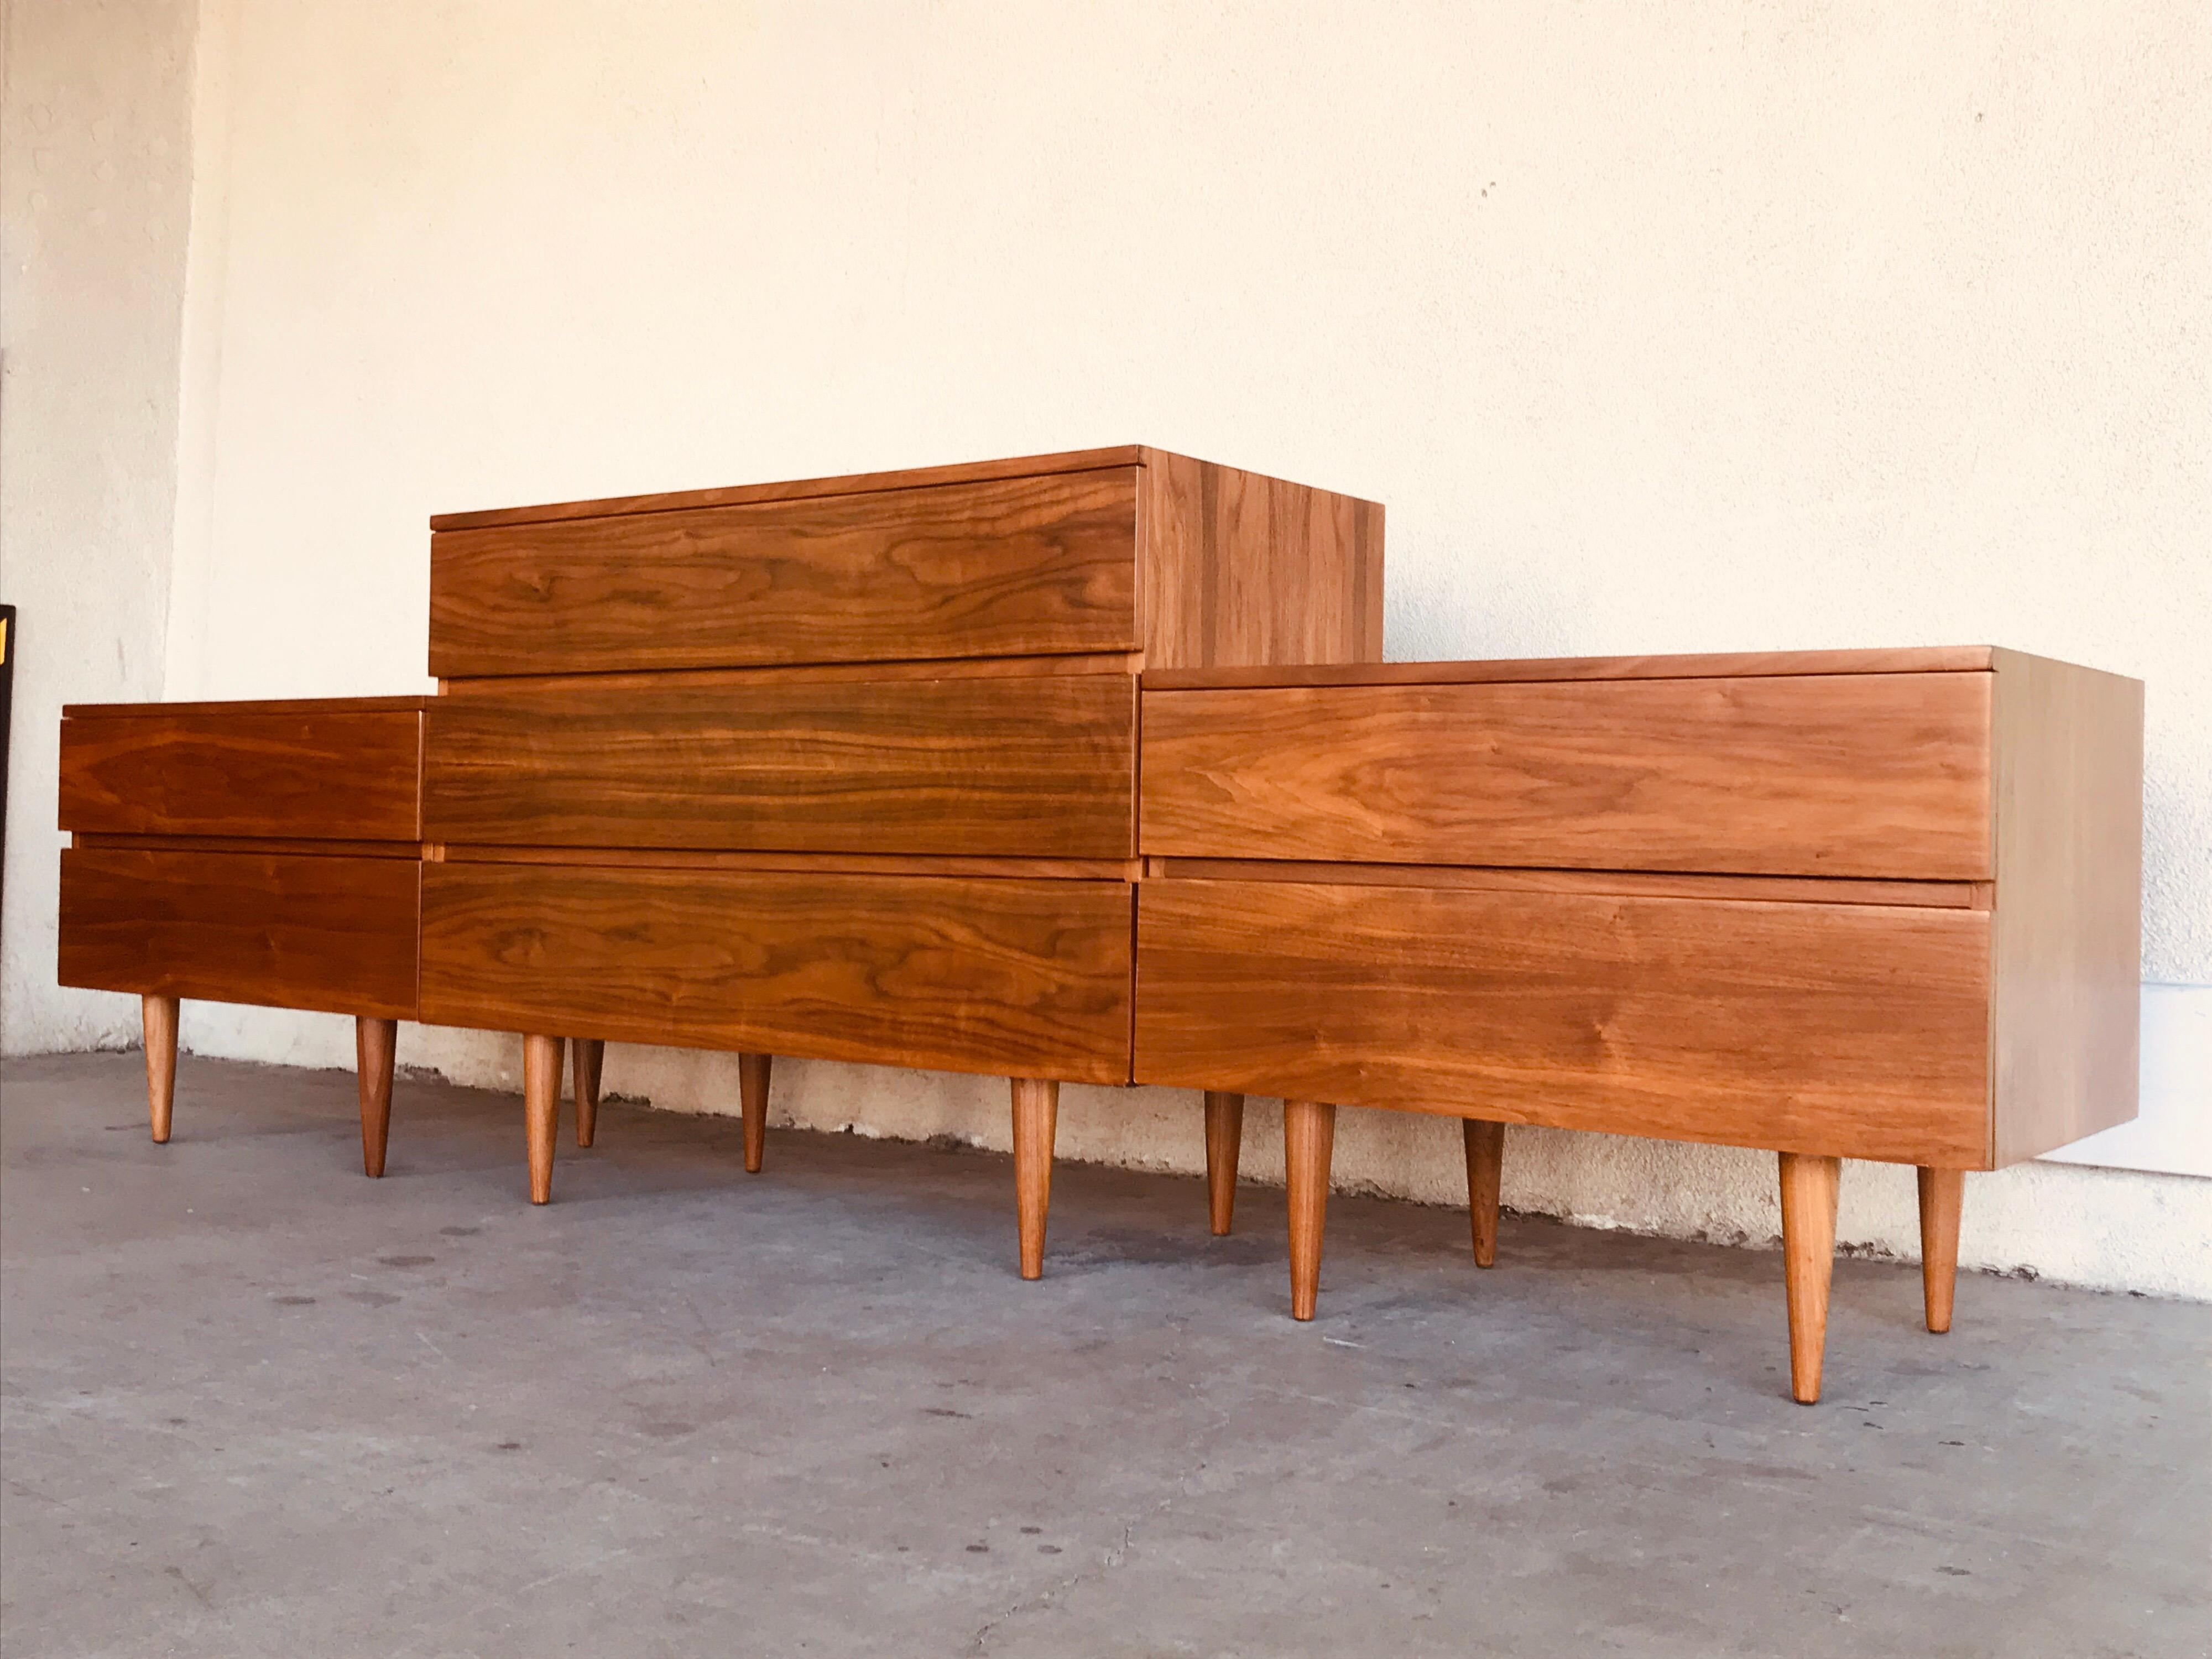 Simple and humble modernist designs.
One dresser and two end tables.
These were current 60 years ago and are still relevant today.
They are made of plywood (no press-board) with beautifully grained walnut veneer, solid walnut legs, do not screw